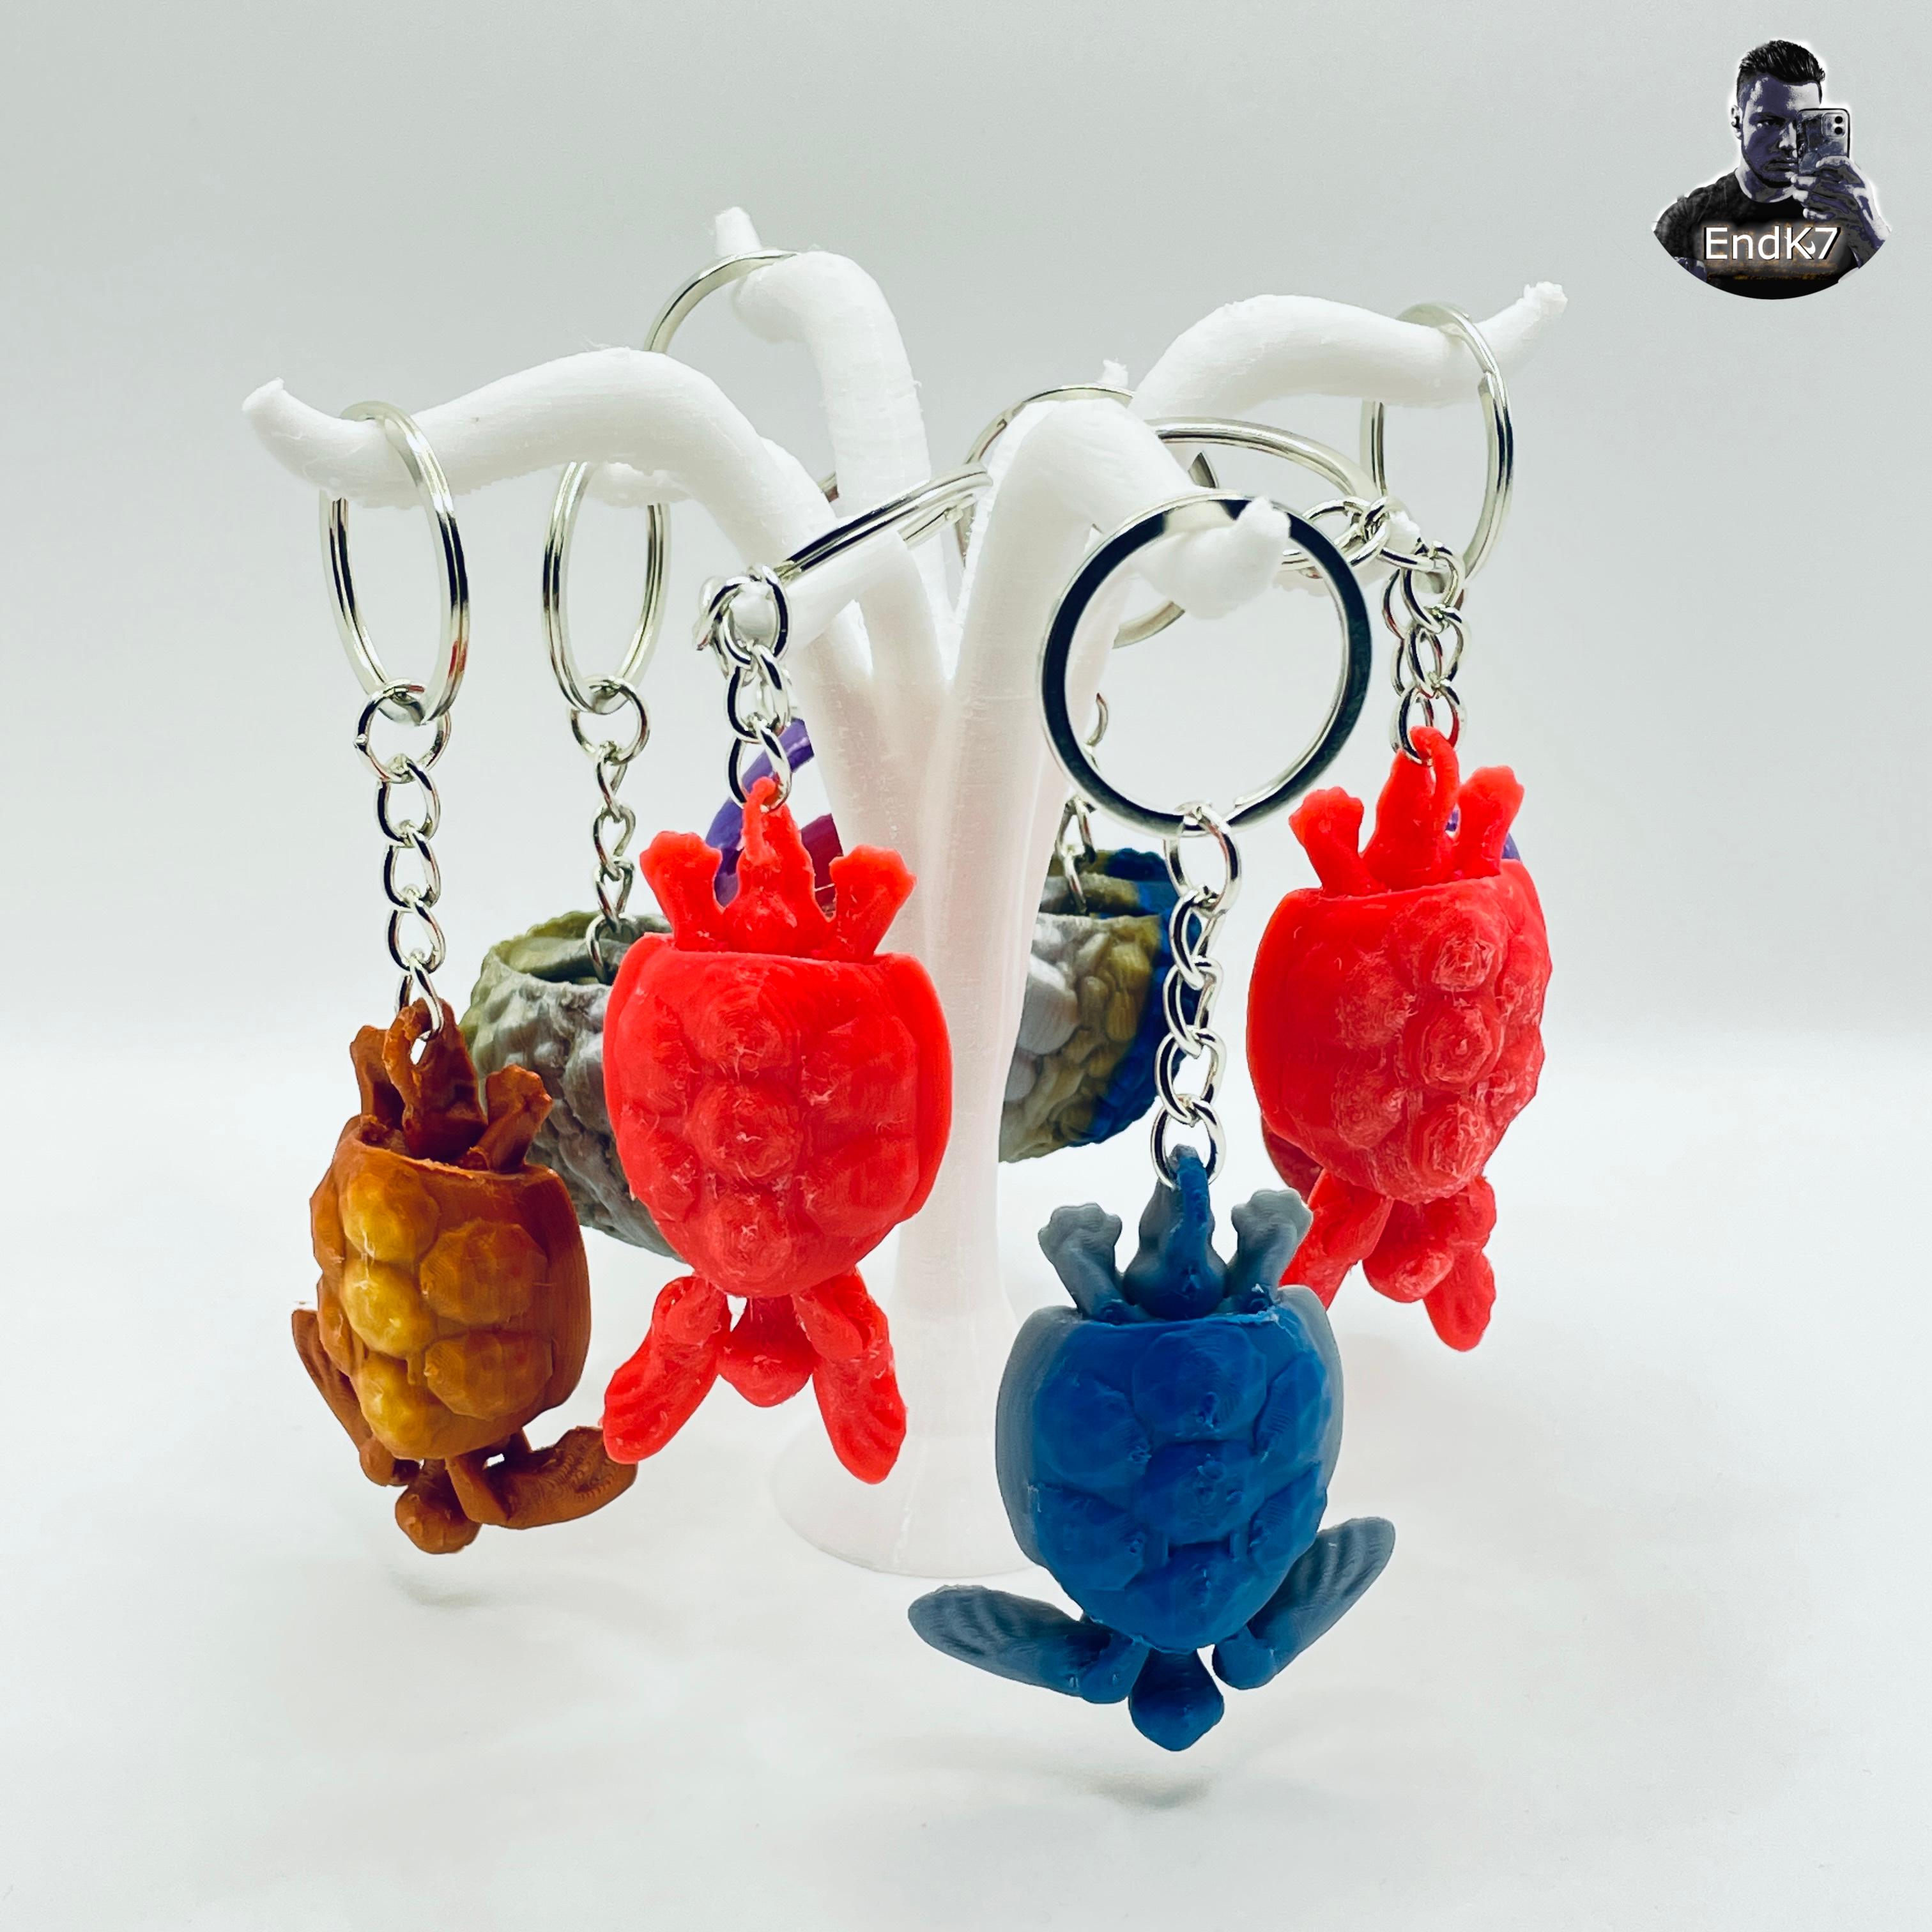 Cute Tiny Turtle Keychain - flexi Fin - Articulated - Print in Place - No Supports 3d model